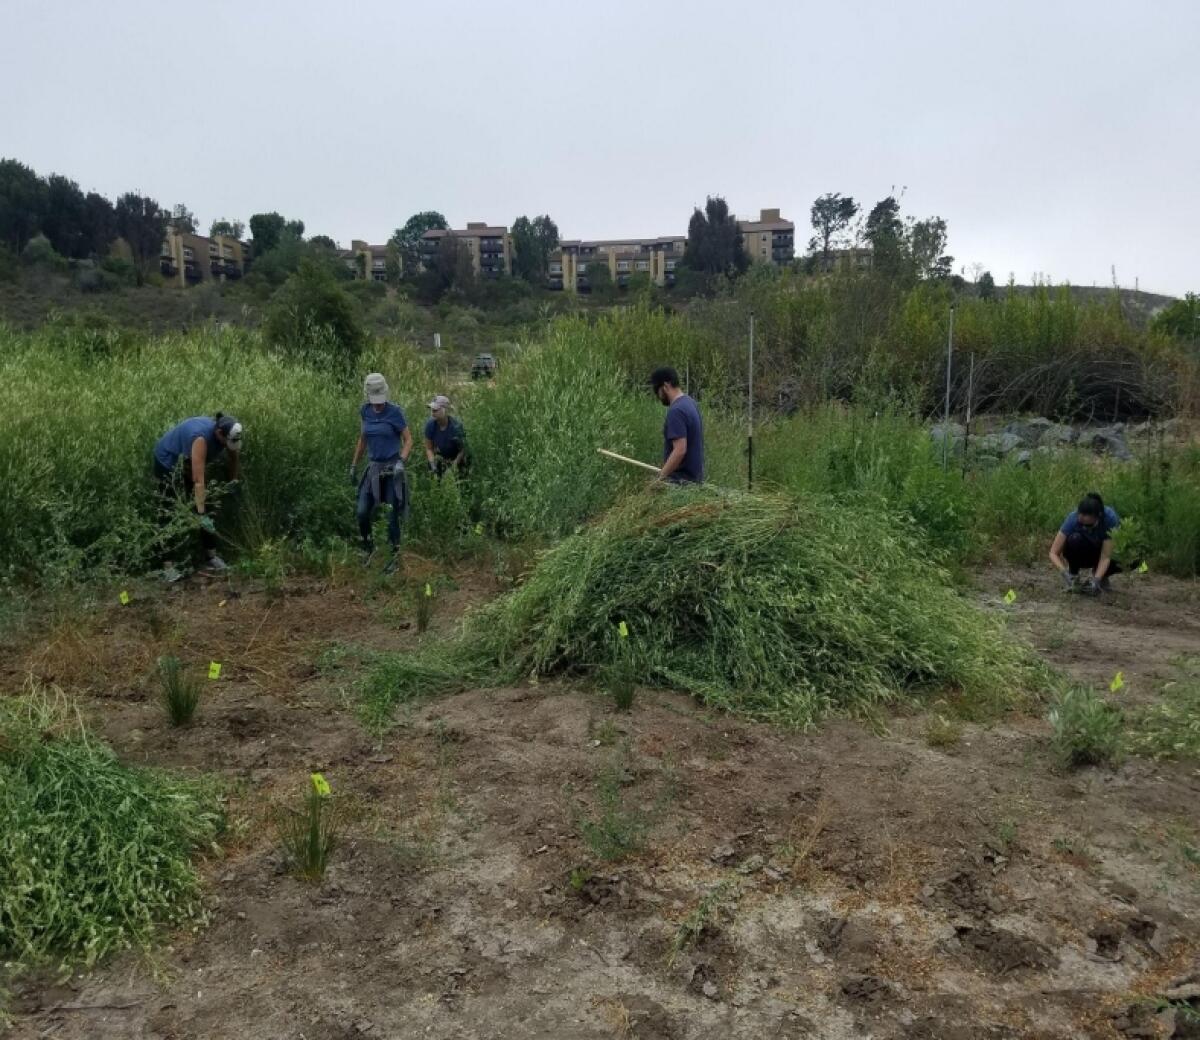 Volunteers clear out the land during the second phase of the Big Canyon restoration project.